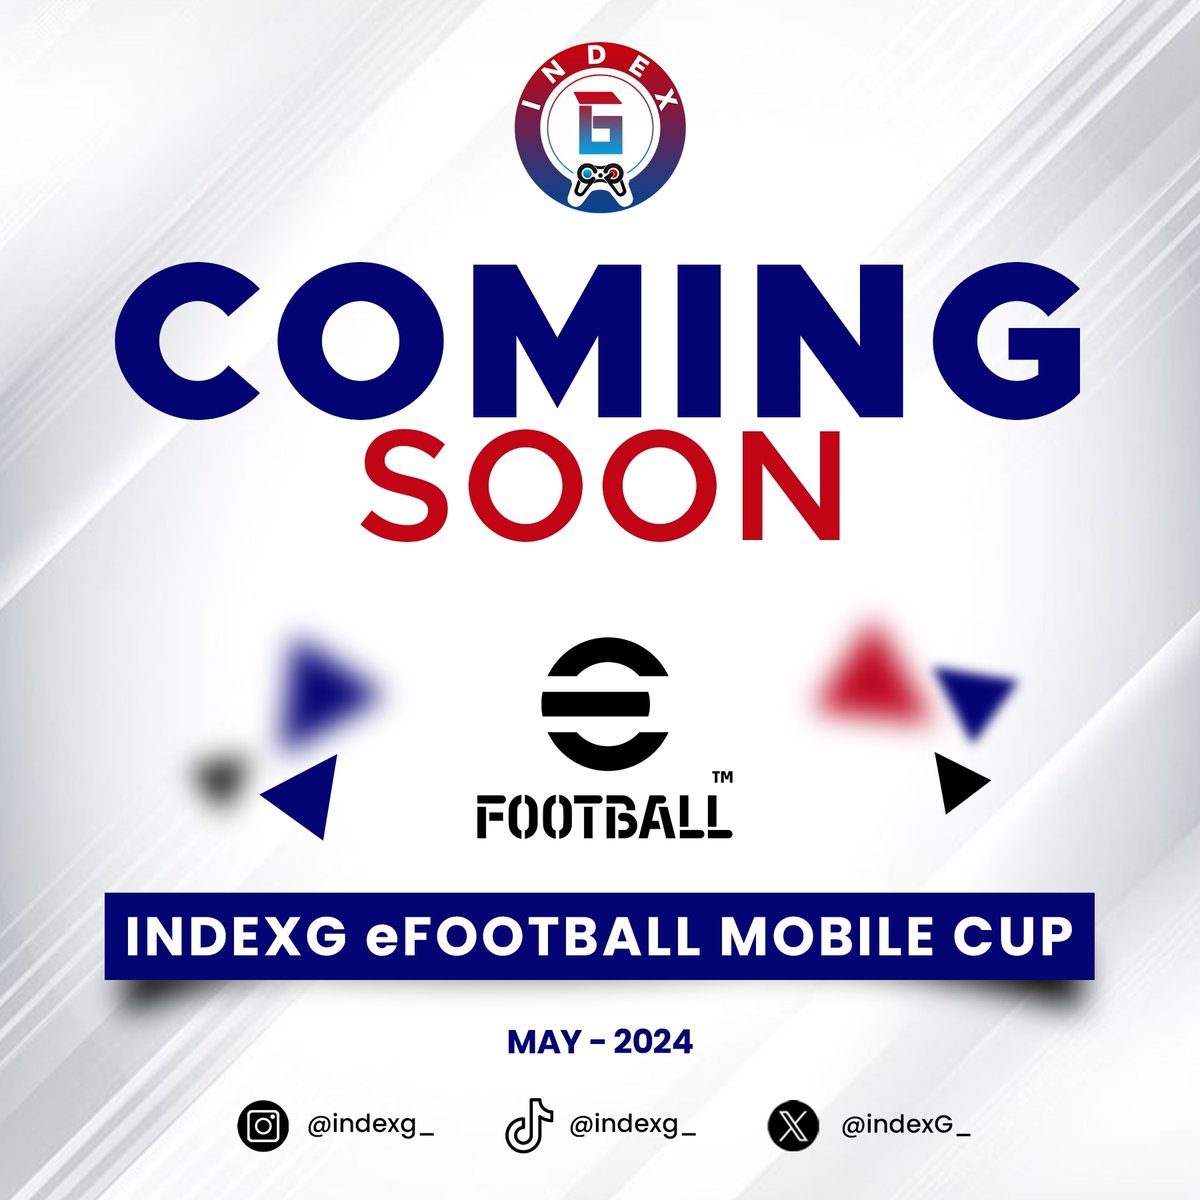 Some #eFootball mobile action is on the horizon #IndexG